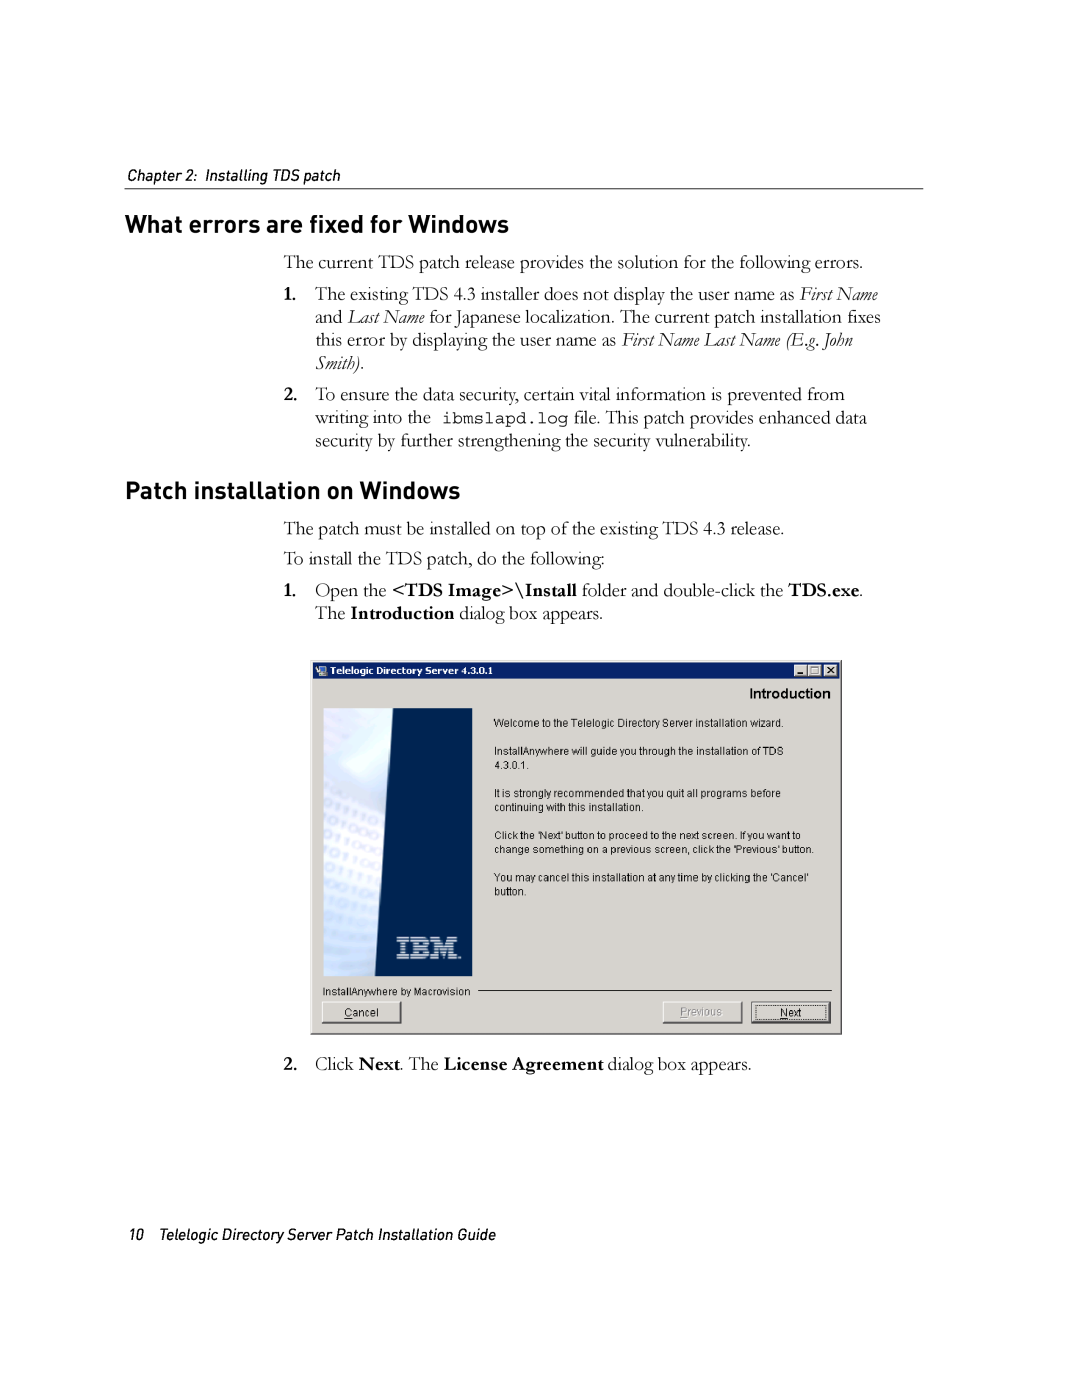 IBM Telelogic Directory Server manual What errors are fixed for Windows, Patch installation on Windows 